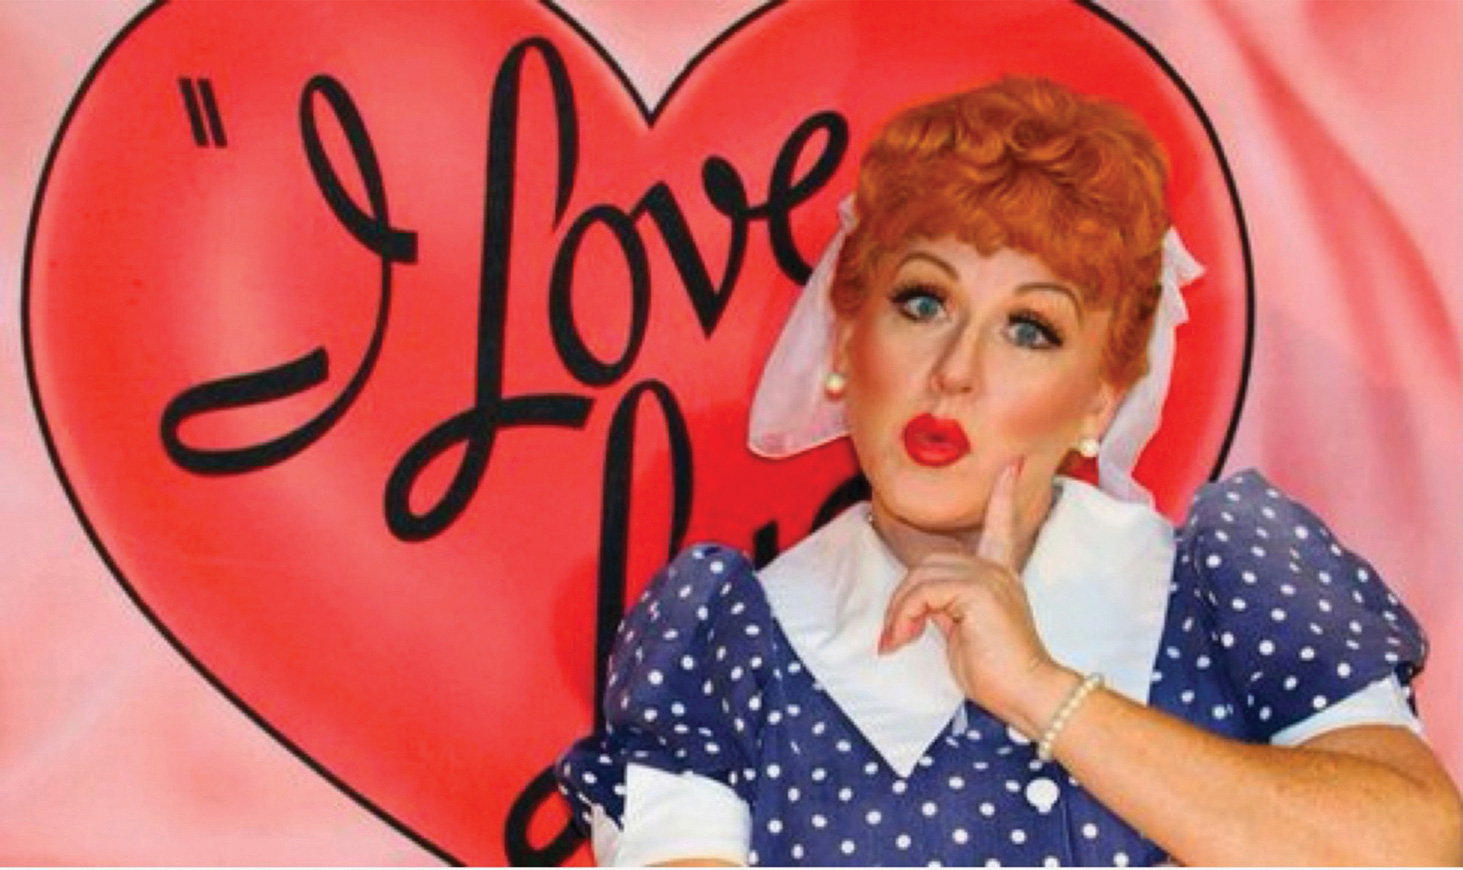 Rhonda Medina, back again by popular demand, will give her exciting and comical impersonation of Lucy Ricardo from the TV show I Love Lucy!